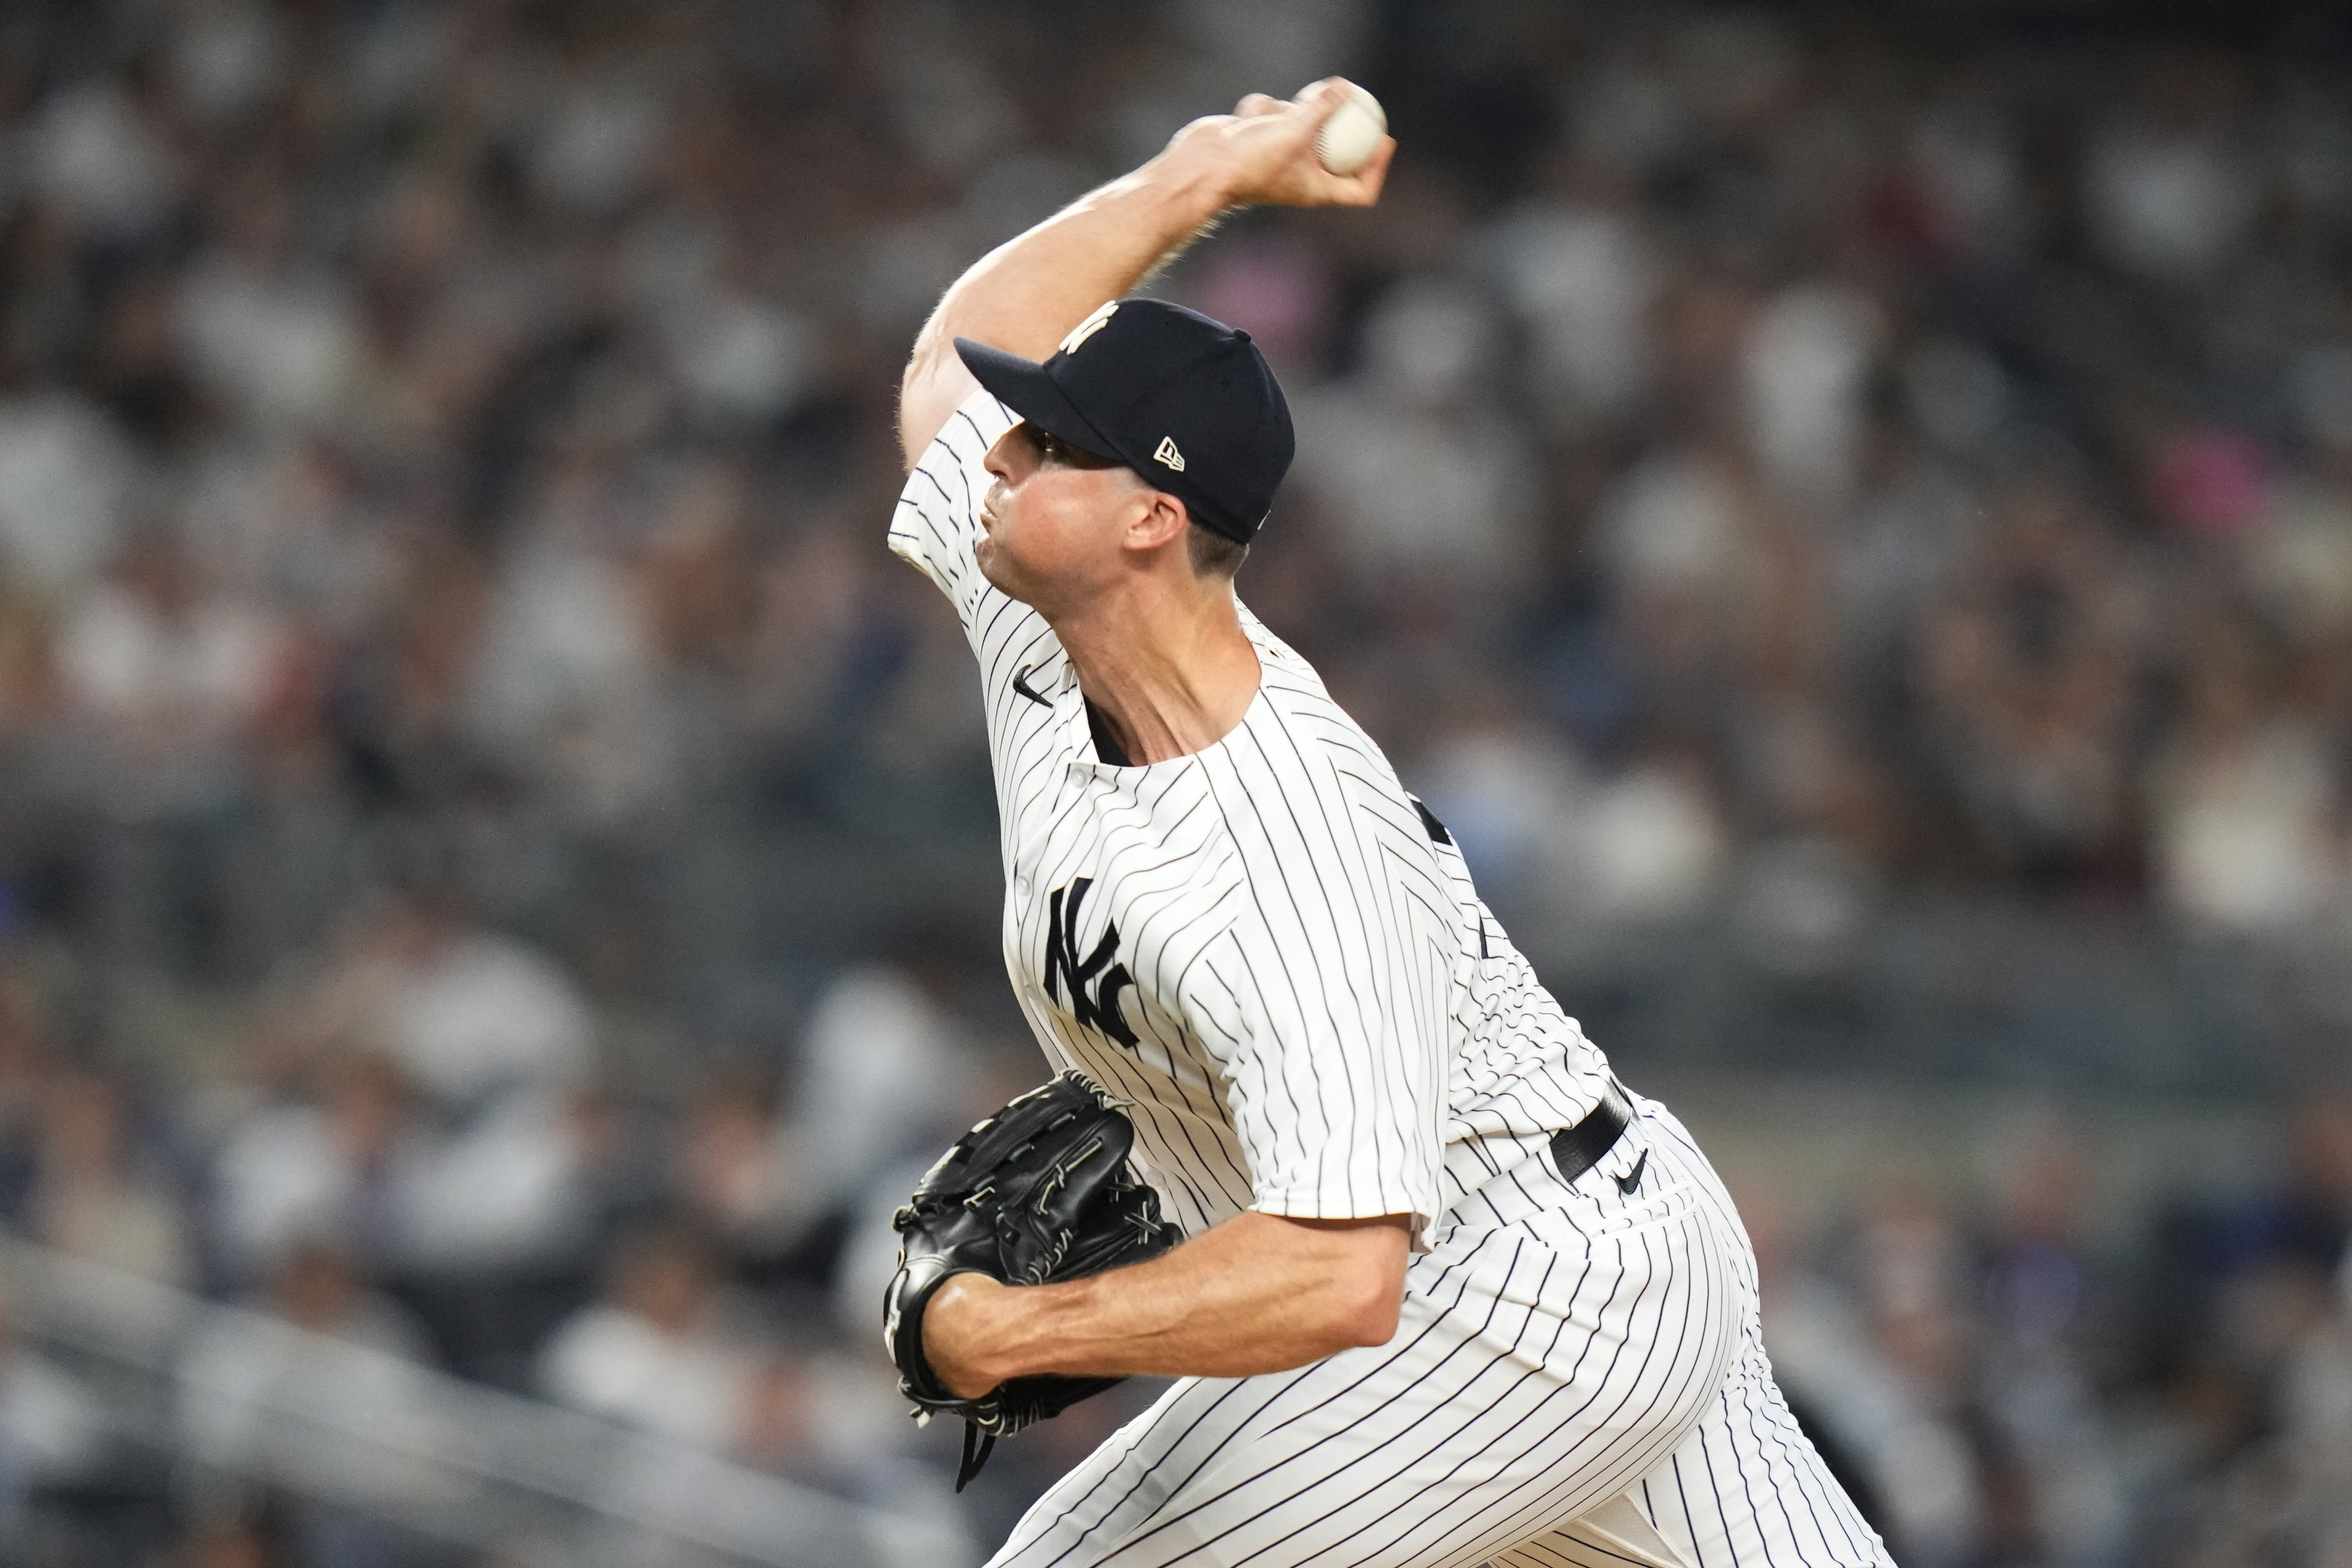 Clay Holmes had a good but inconsistent 2022 with the Yankees